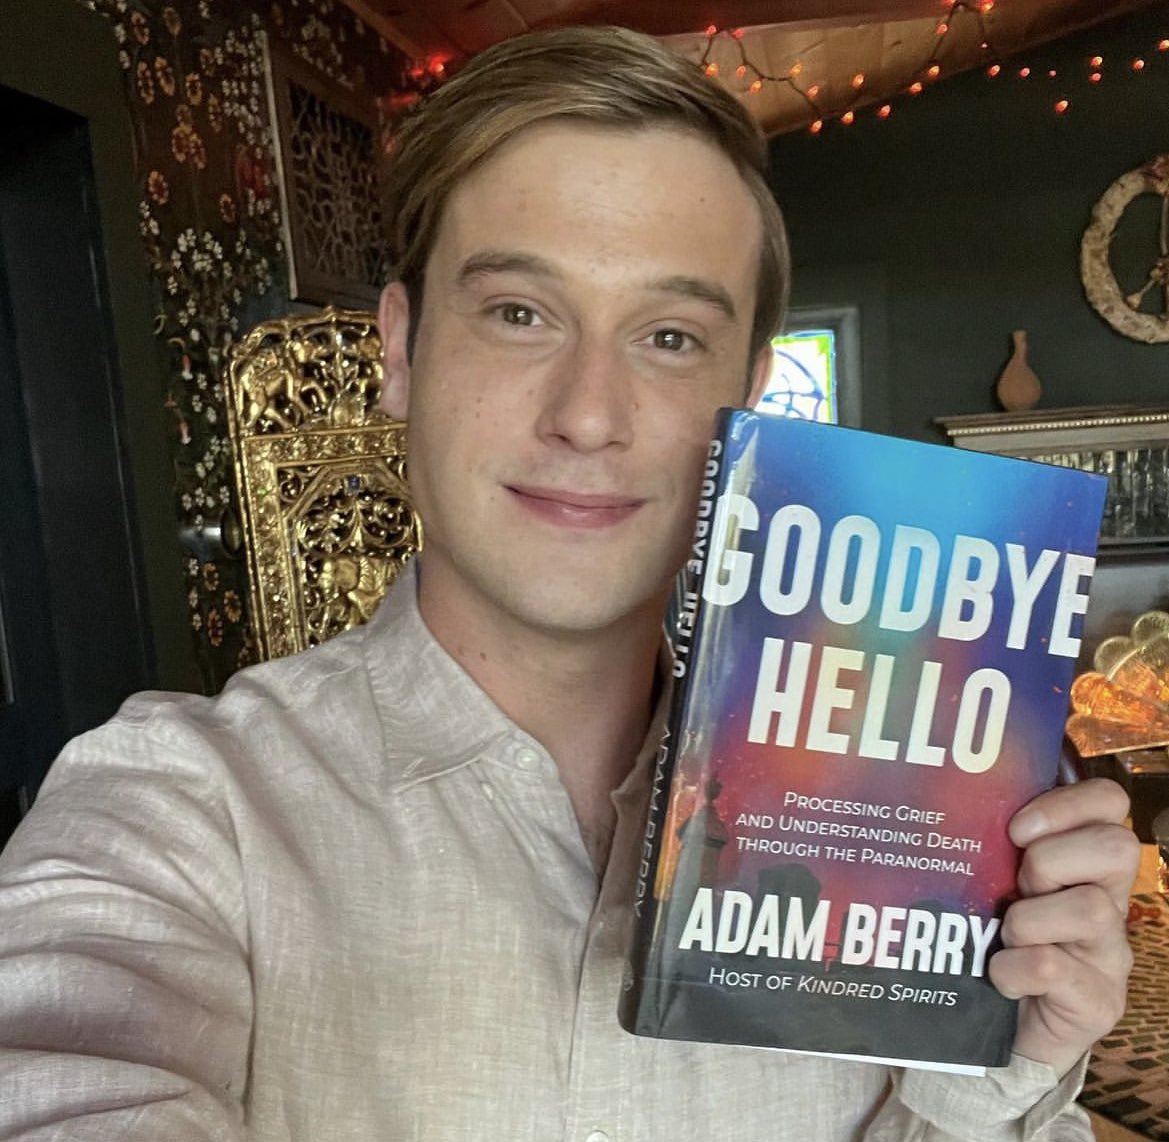 Tyler Henry reading “Goodbye Hello” by @AdamJBerry #BookRecosFromCelebs #read #book #booktwitter #tylerhenry #tylerhenrymedium #medium #paranormal #goodbyehello #adamberry #grief #griefjourney #hollywoodmedium #lifeafterdeath #clairvoyant #kindredspirits #psychicmedium